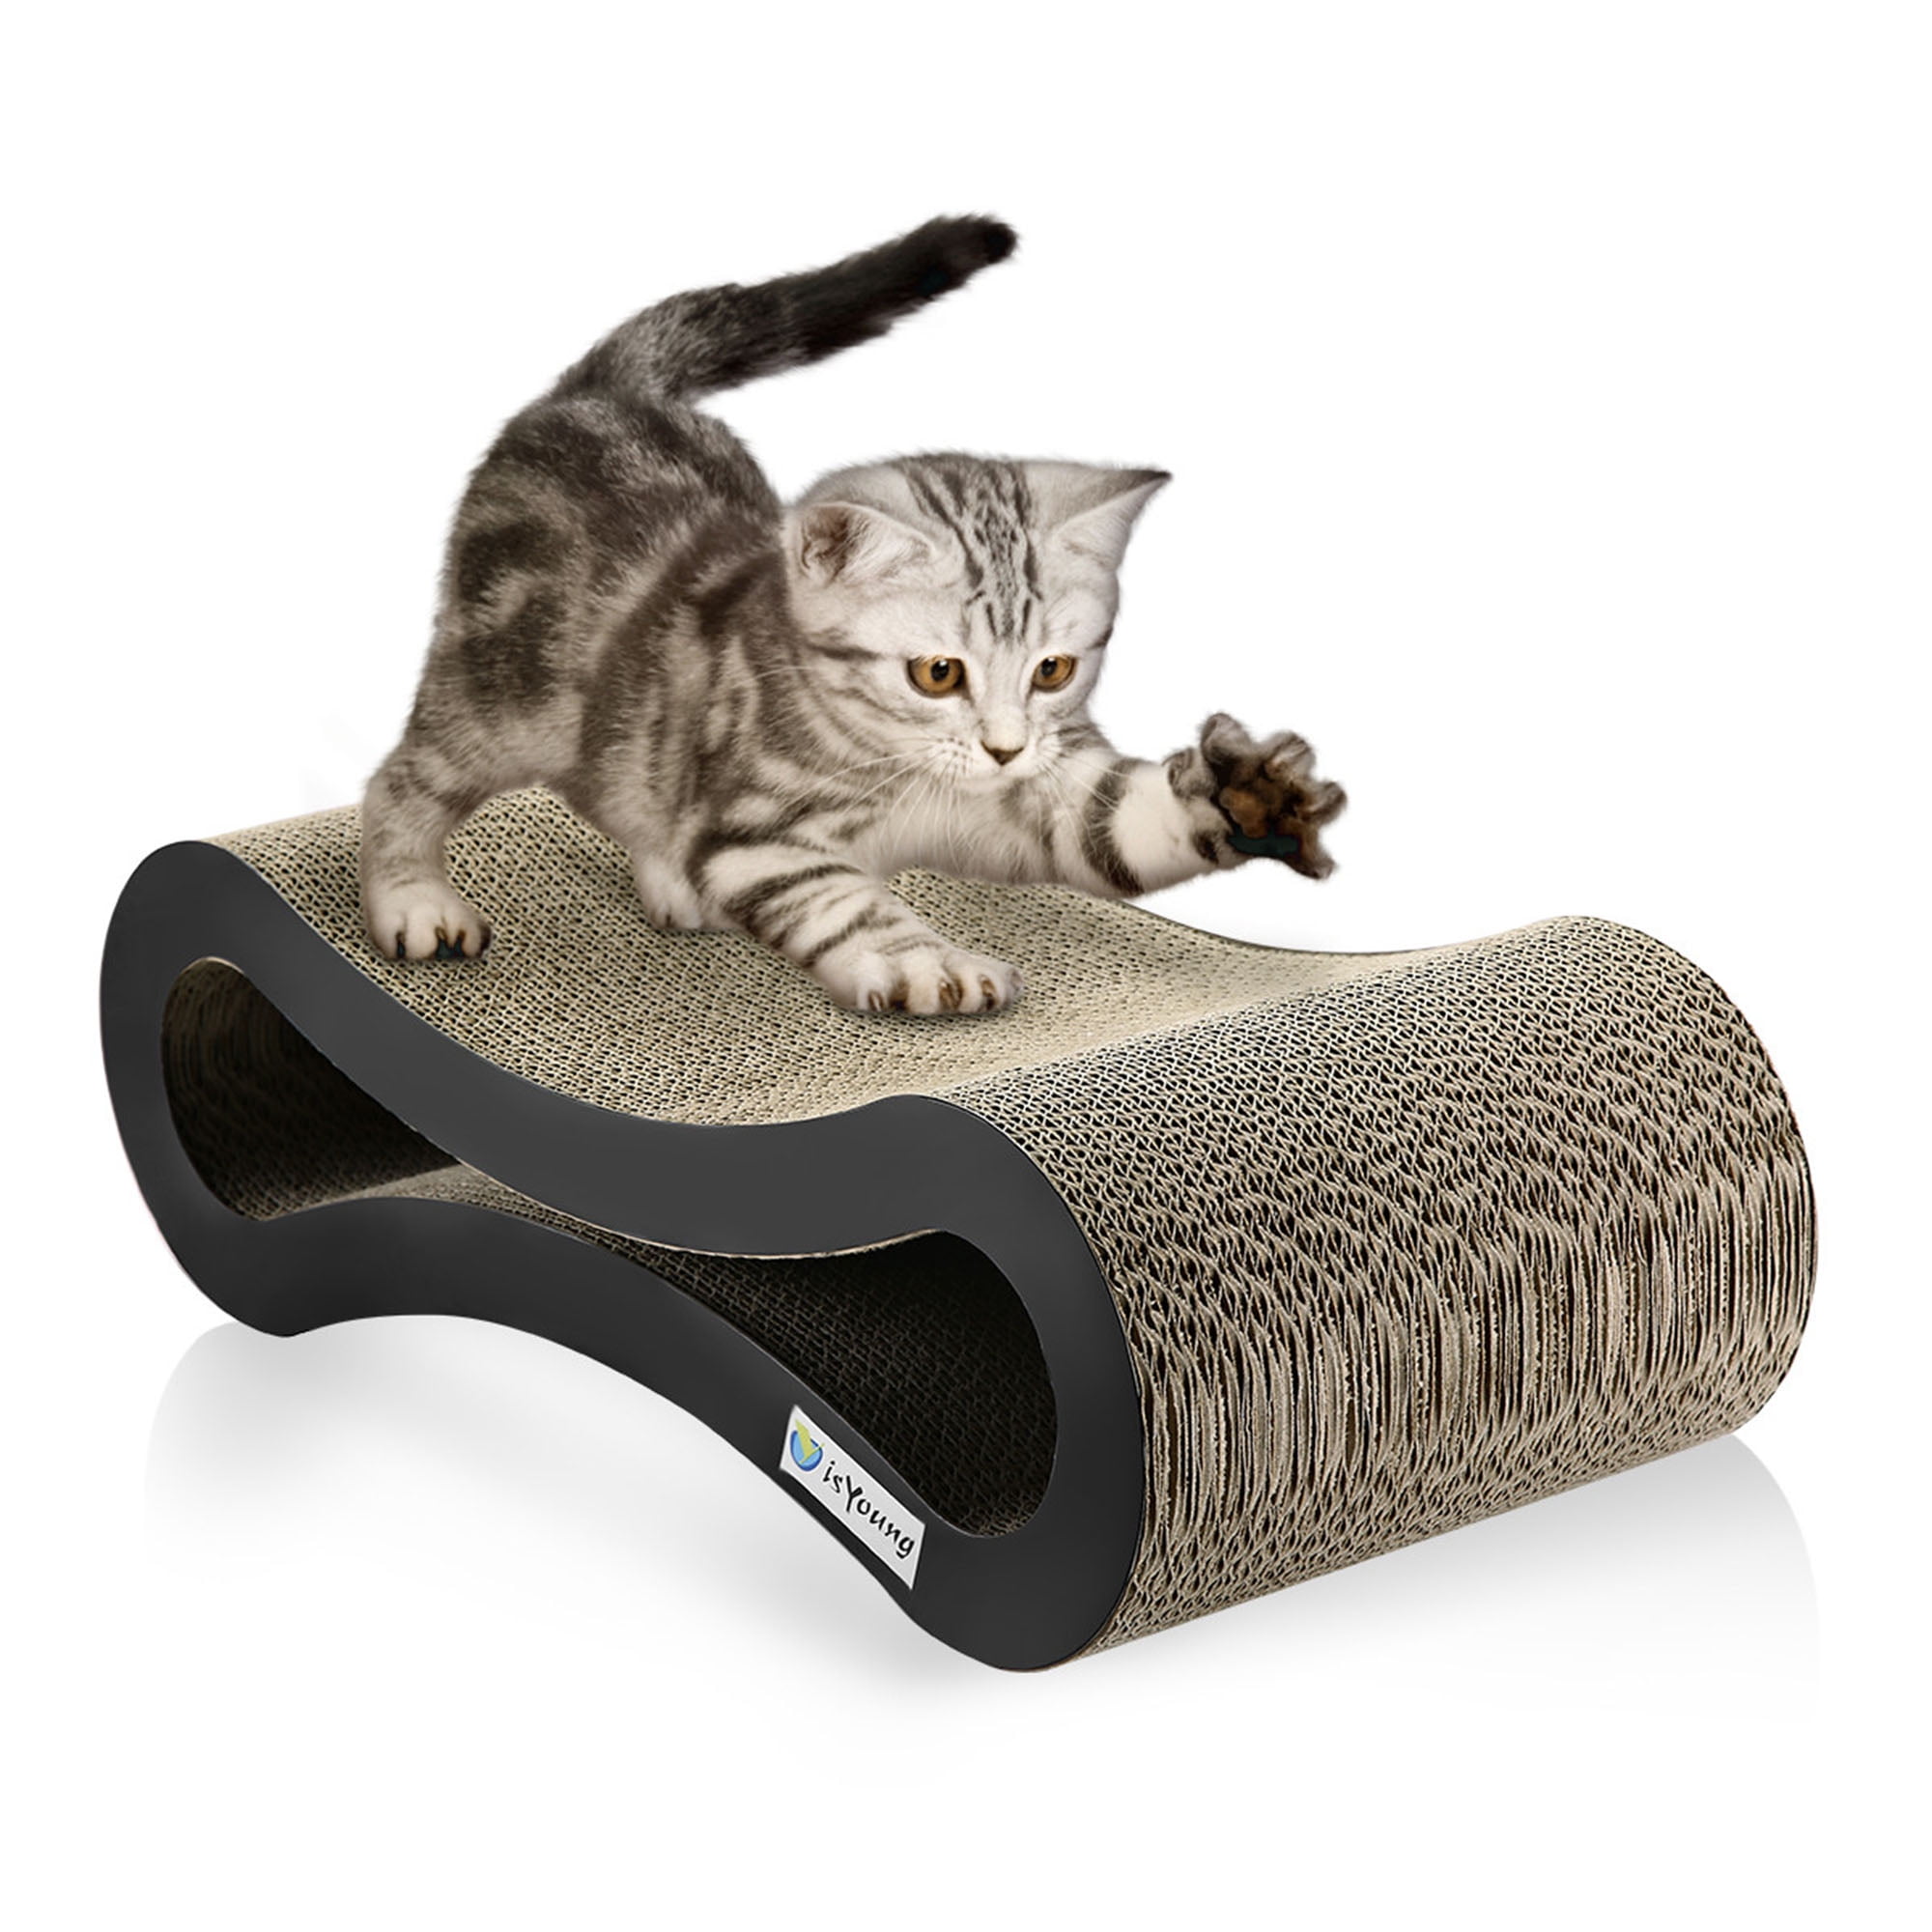 isYoung Cat Scratcher Lounge & Bed Cat Scratcher Cardboard Protector